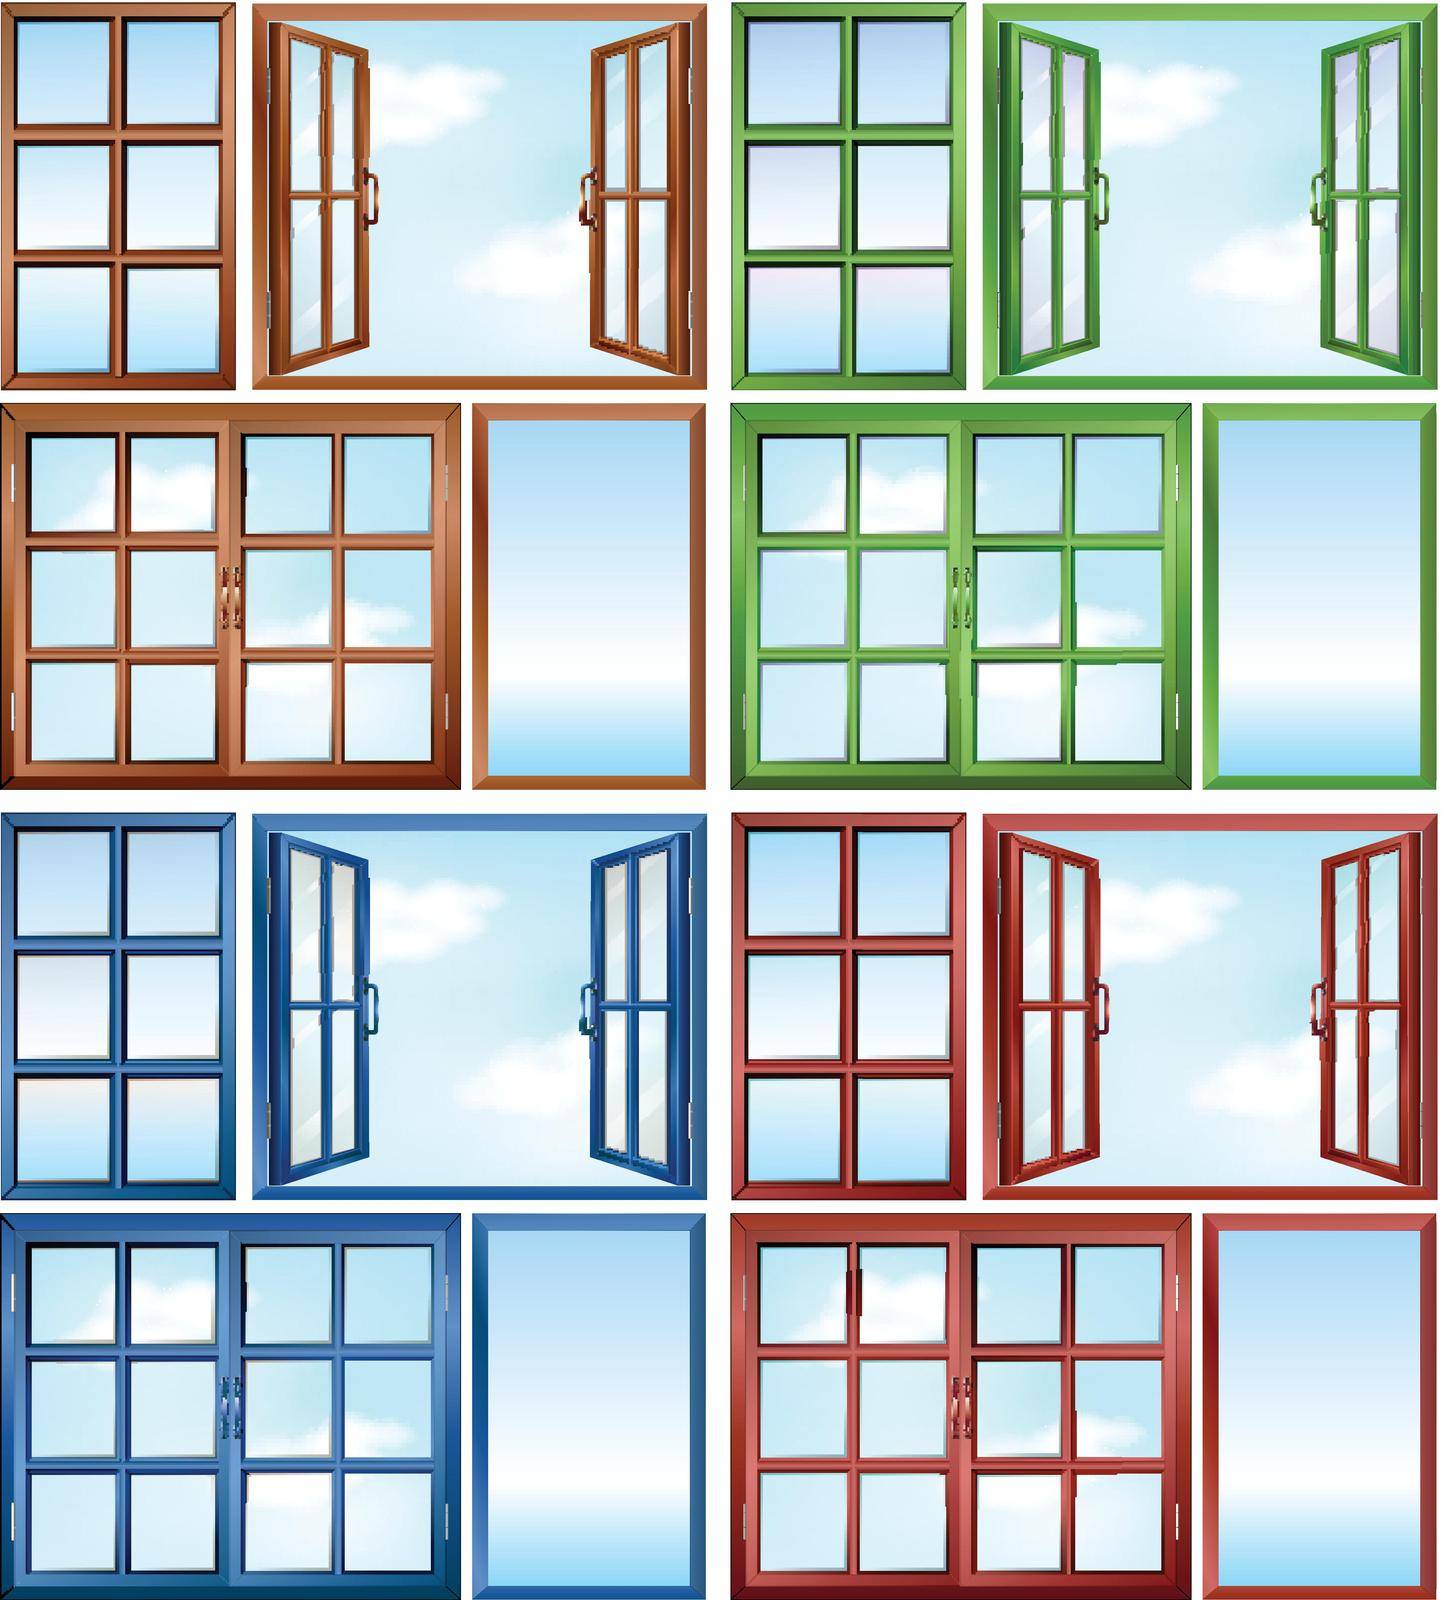 Windows in different colors by iimages